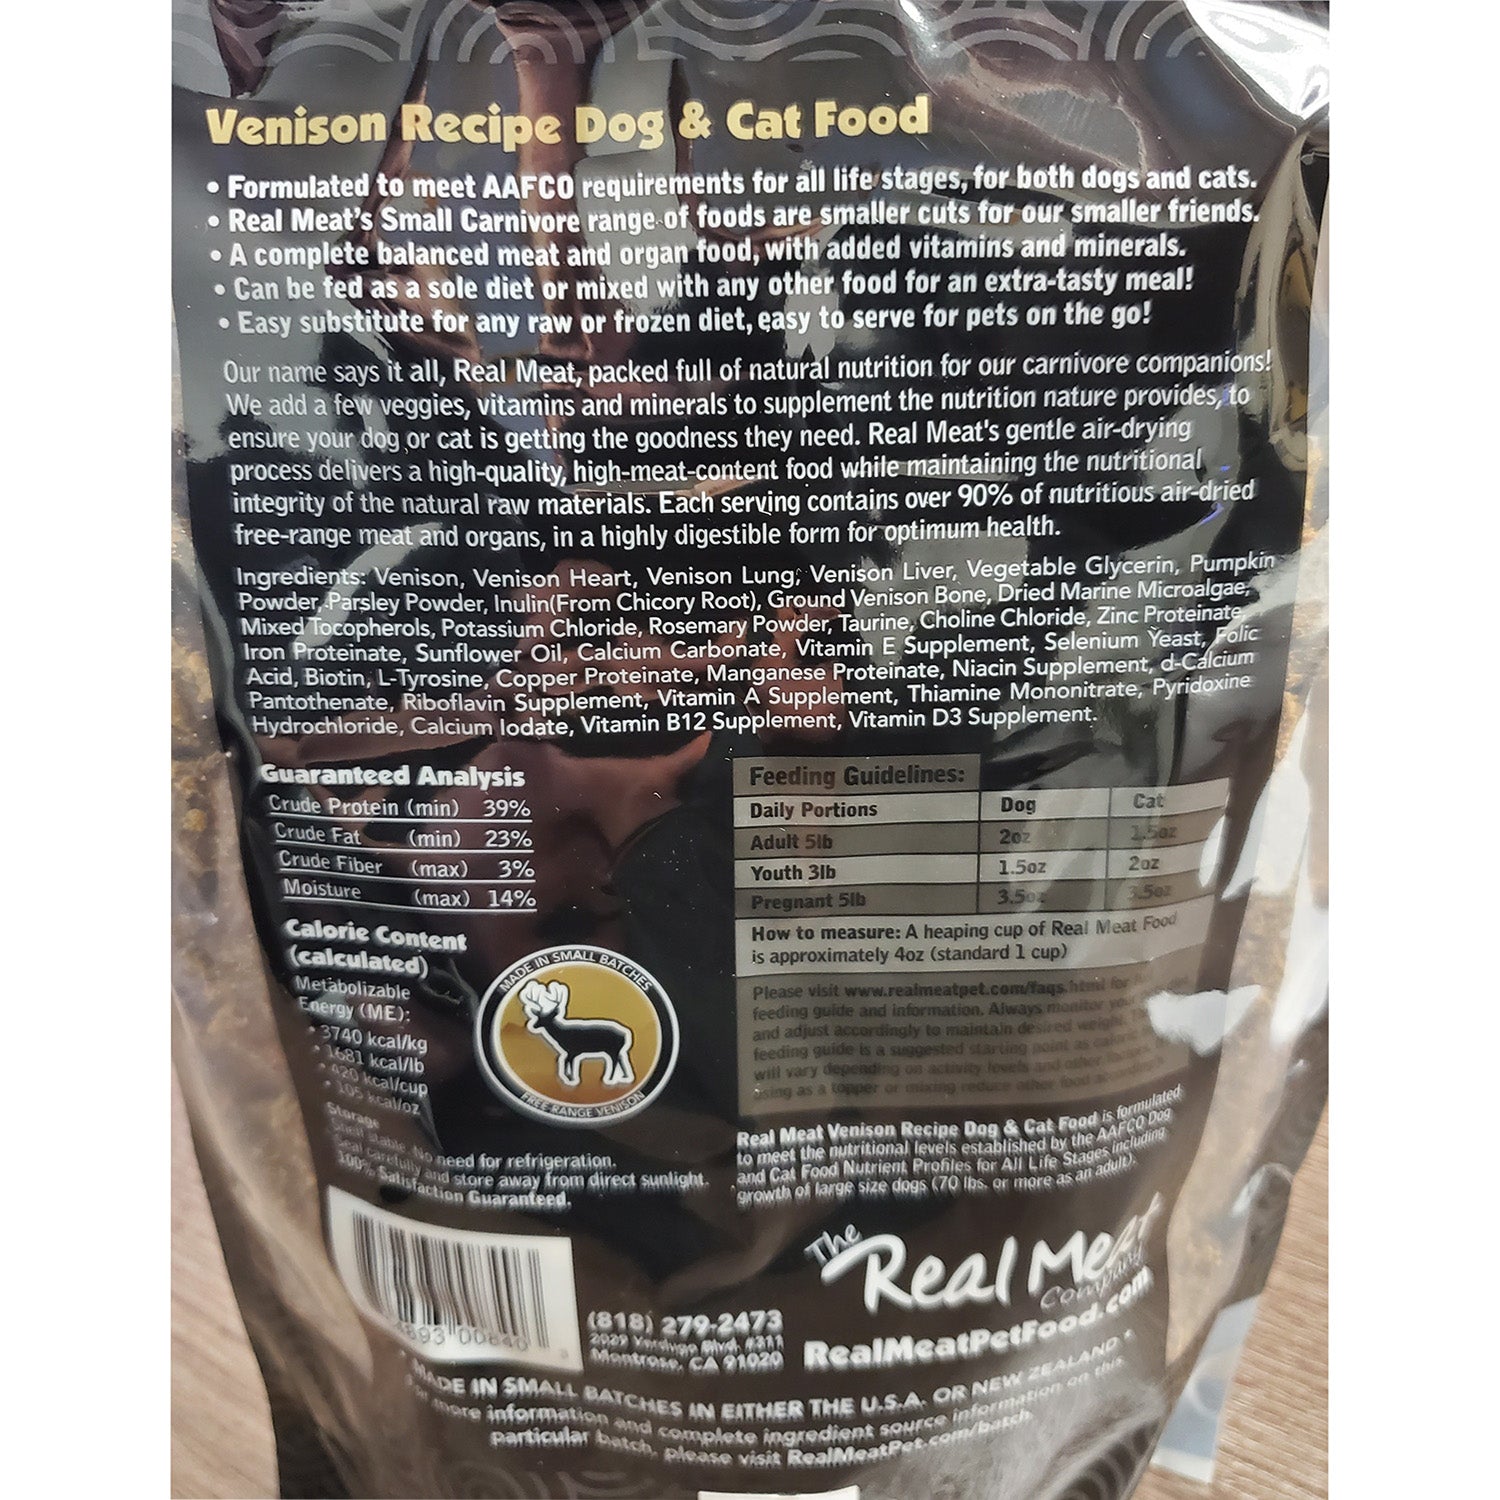 Real Meat Air-Dried Cat Food, Venison